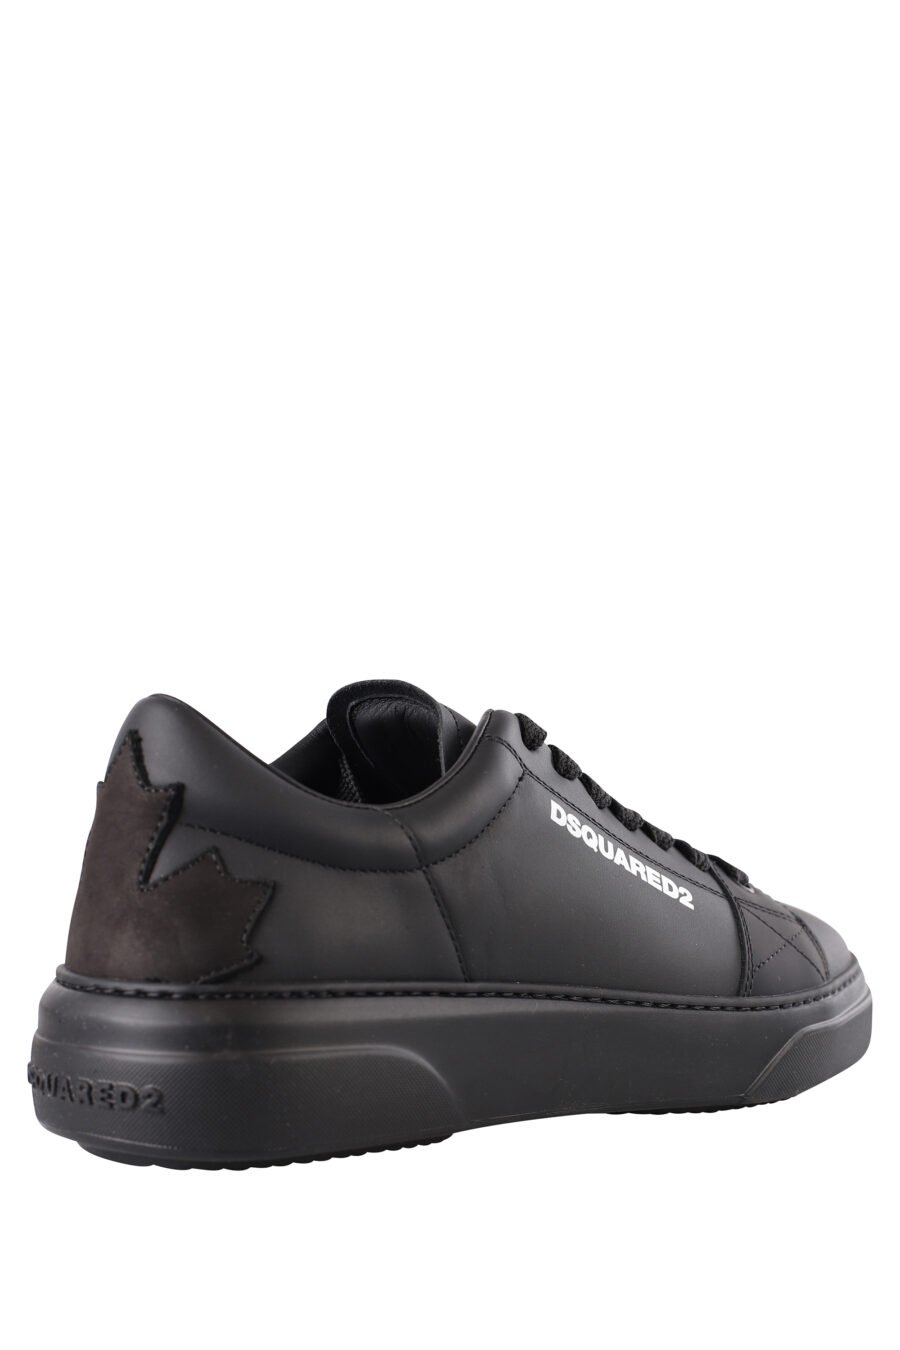 Black trainers with small white logo and black sole - IMG 1149